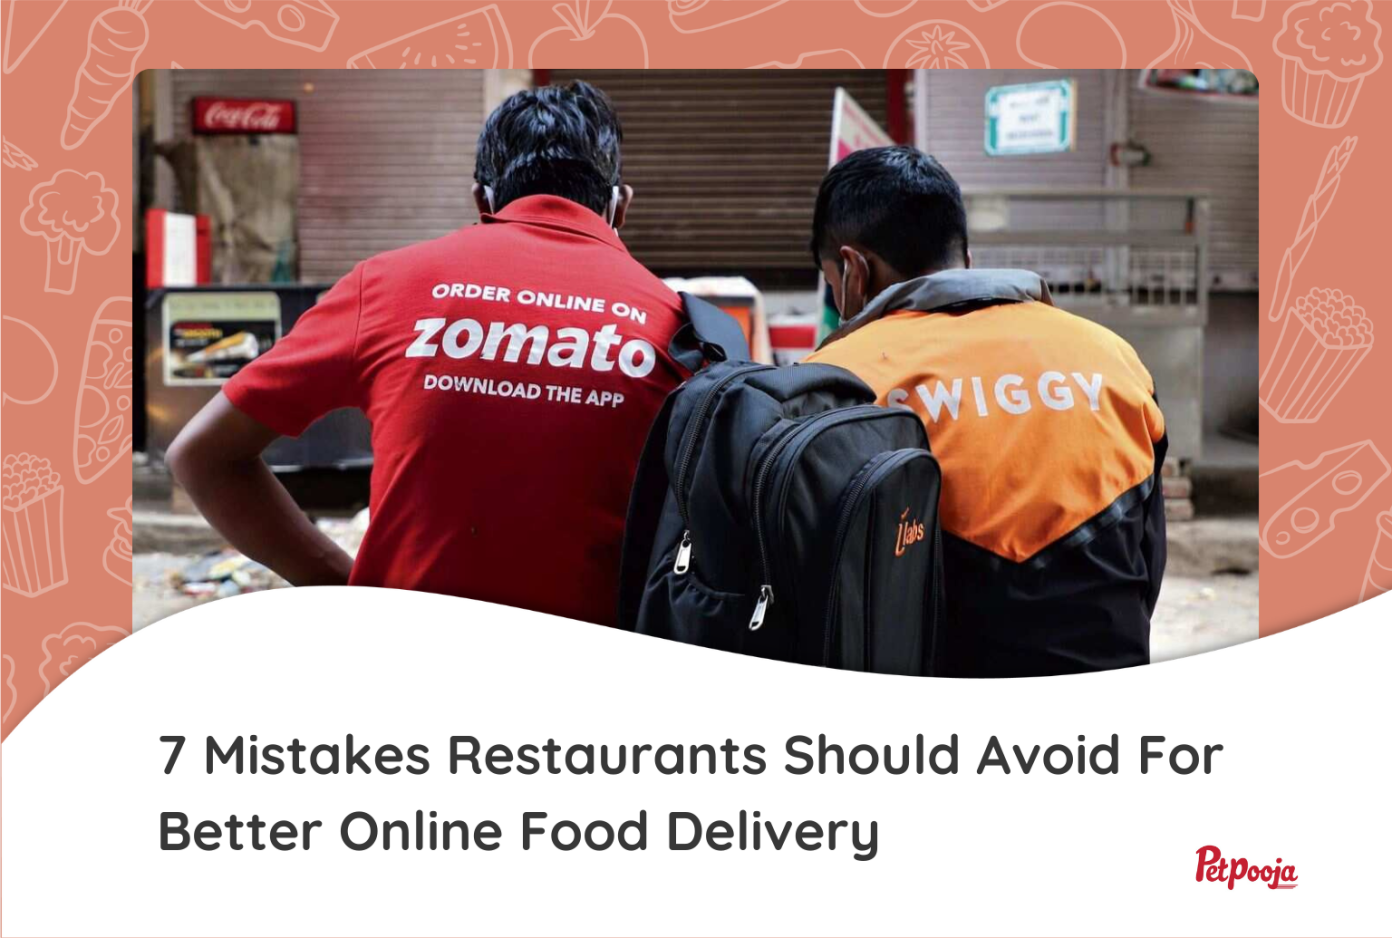 7 Mistakes Restaurants Should Avoid For Better Online Food Delivery